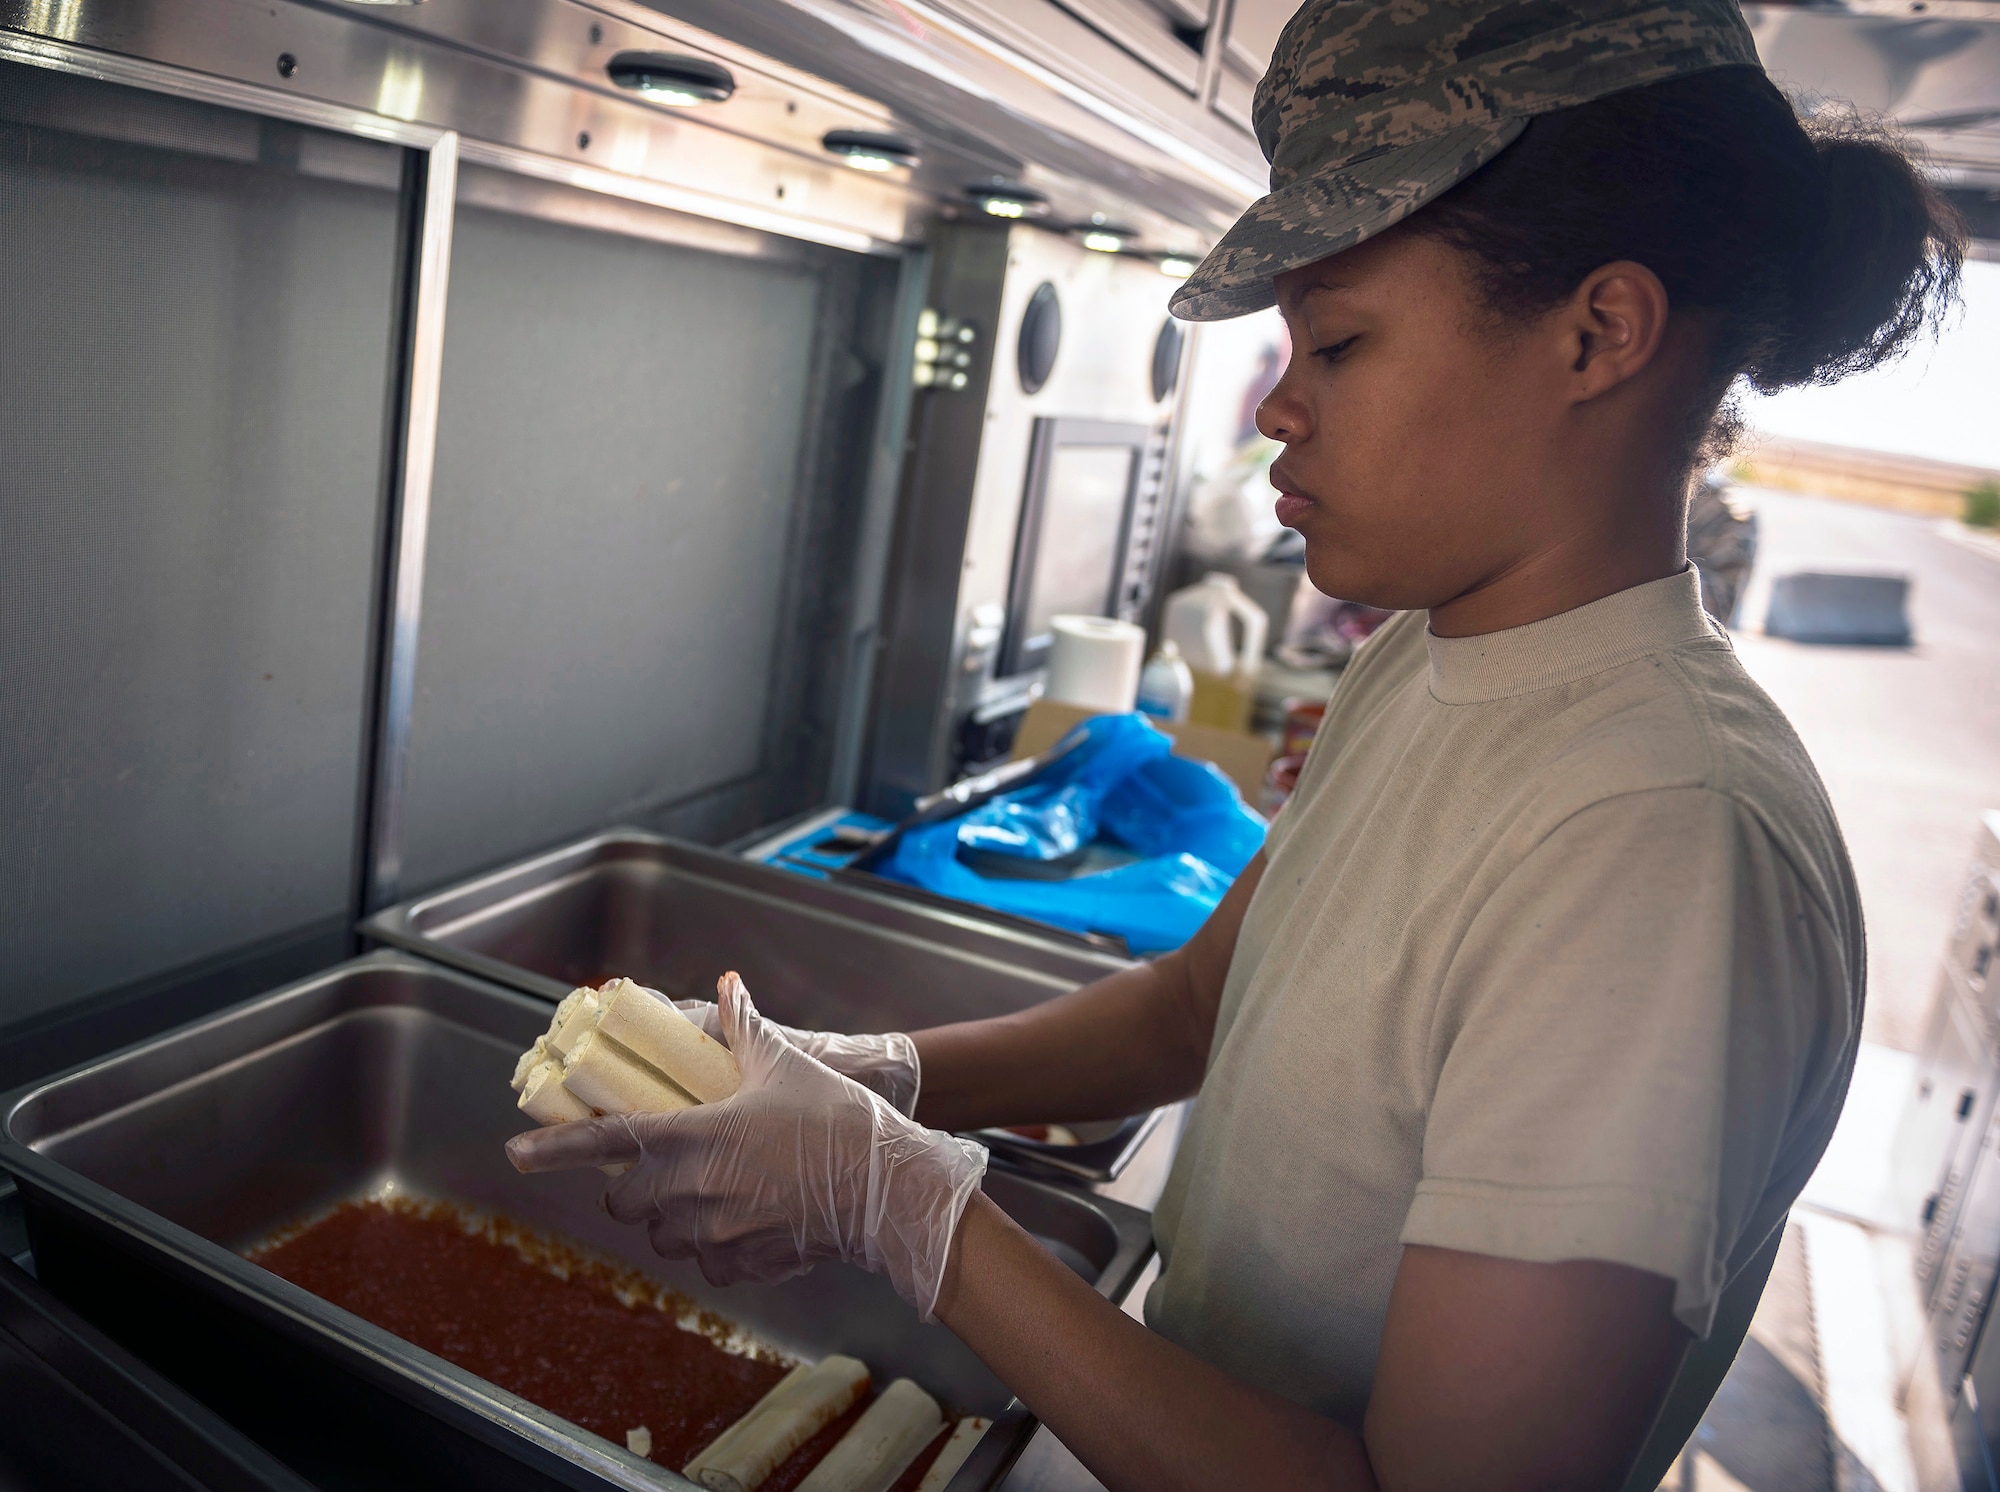 U.S. Air Force Airman 1st Class Starlyn Stratton, a services specialist with the 182nd Force Support Squadron, Illinois Air National Guard, prepares manicotti for dinner in Crow Agency, Mont., Aug. 1, 2017. She and seven other services specialists provided meal support to 182nd Civil Engineer Squadron Airmen building veterans’ homes for the Innovative Readiness Training program. (U.S. Air National Guard photo by Tech. Sgt. Lealan Buehrer)